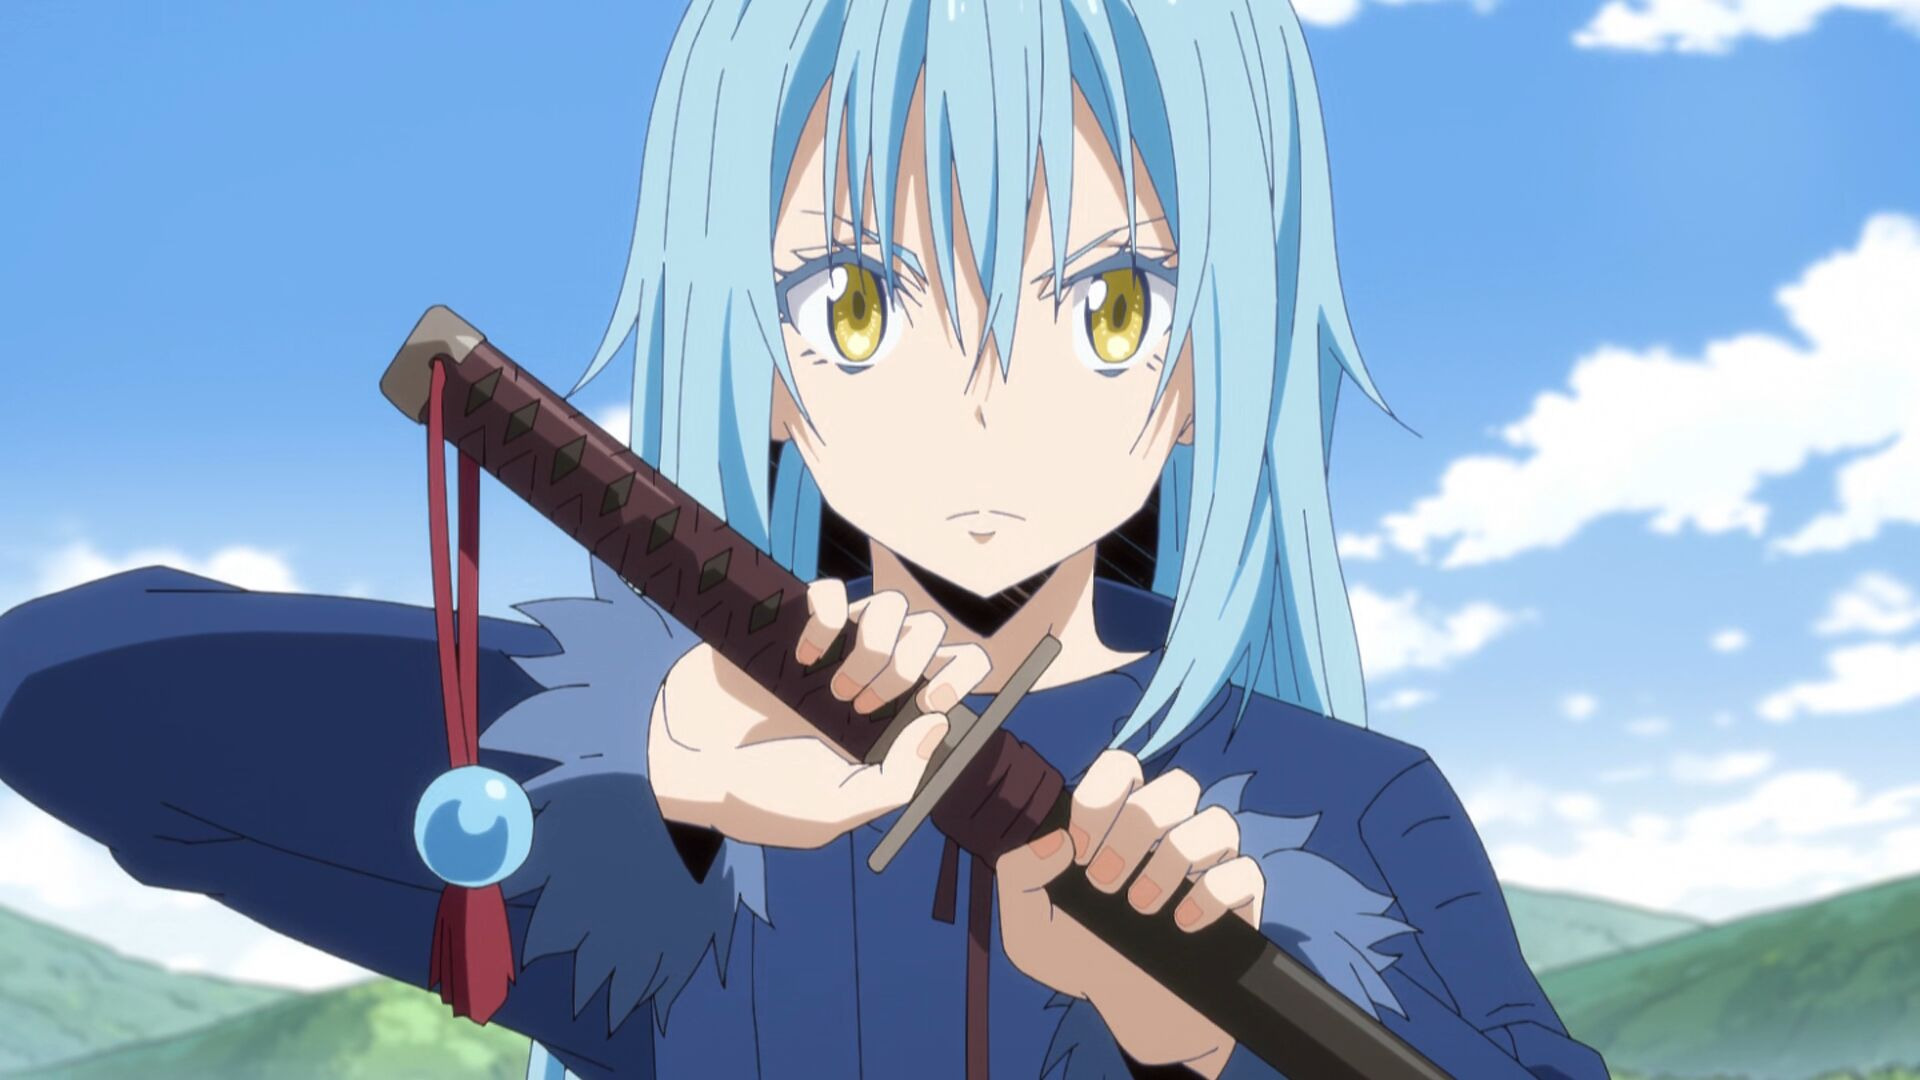 That Time I Got Reincarnated as a Slime — s02e06 — The Beauty Makes Her Move